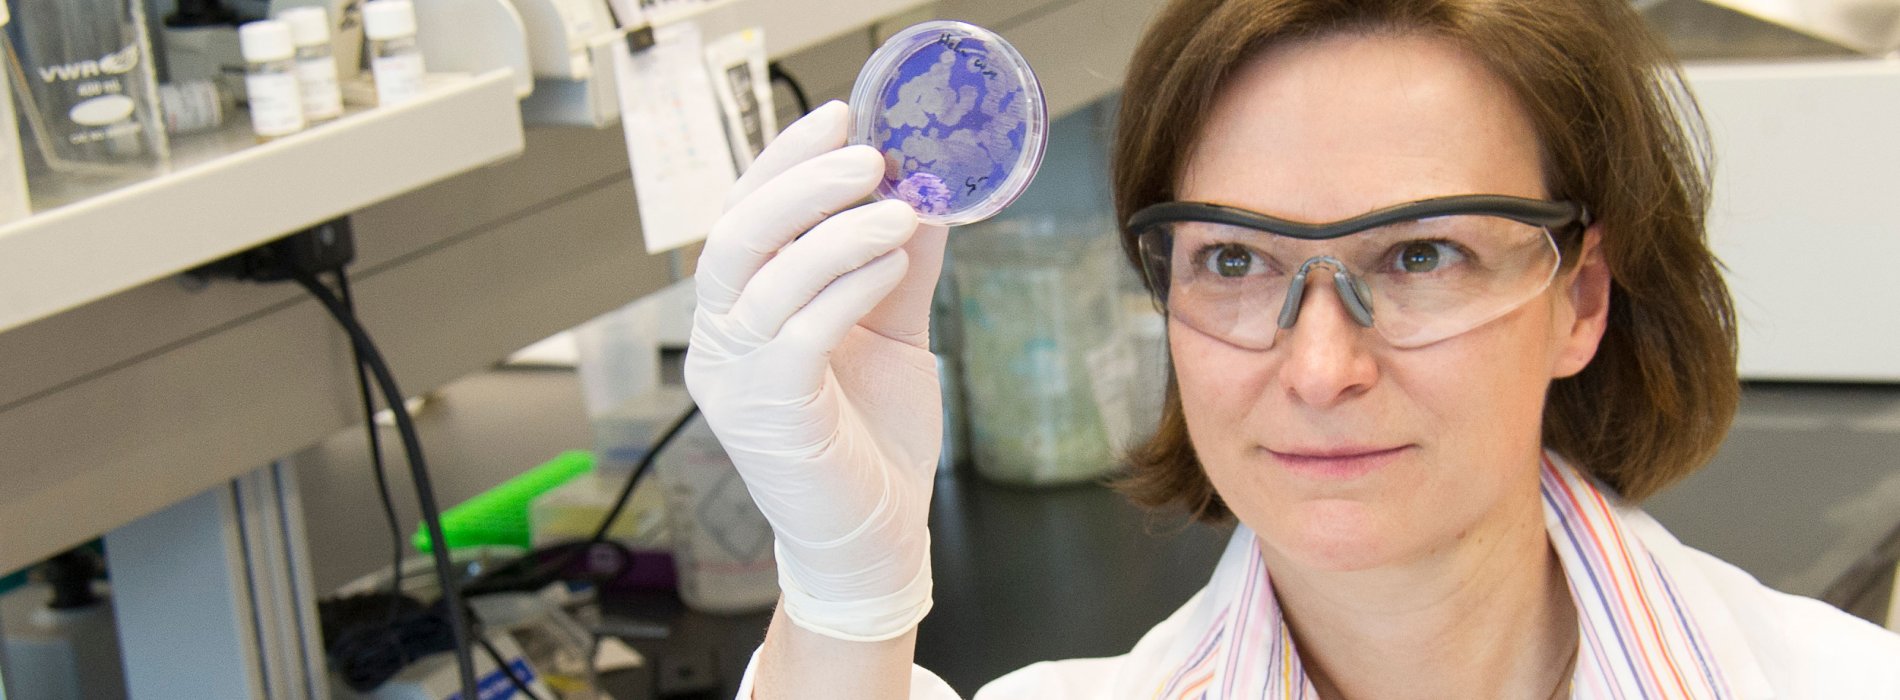 A woman wearing protective glasses and gloves holds up a petri dish with purple agar inside a laboratory.